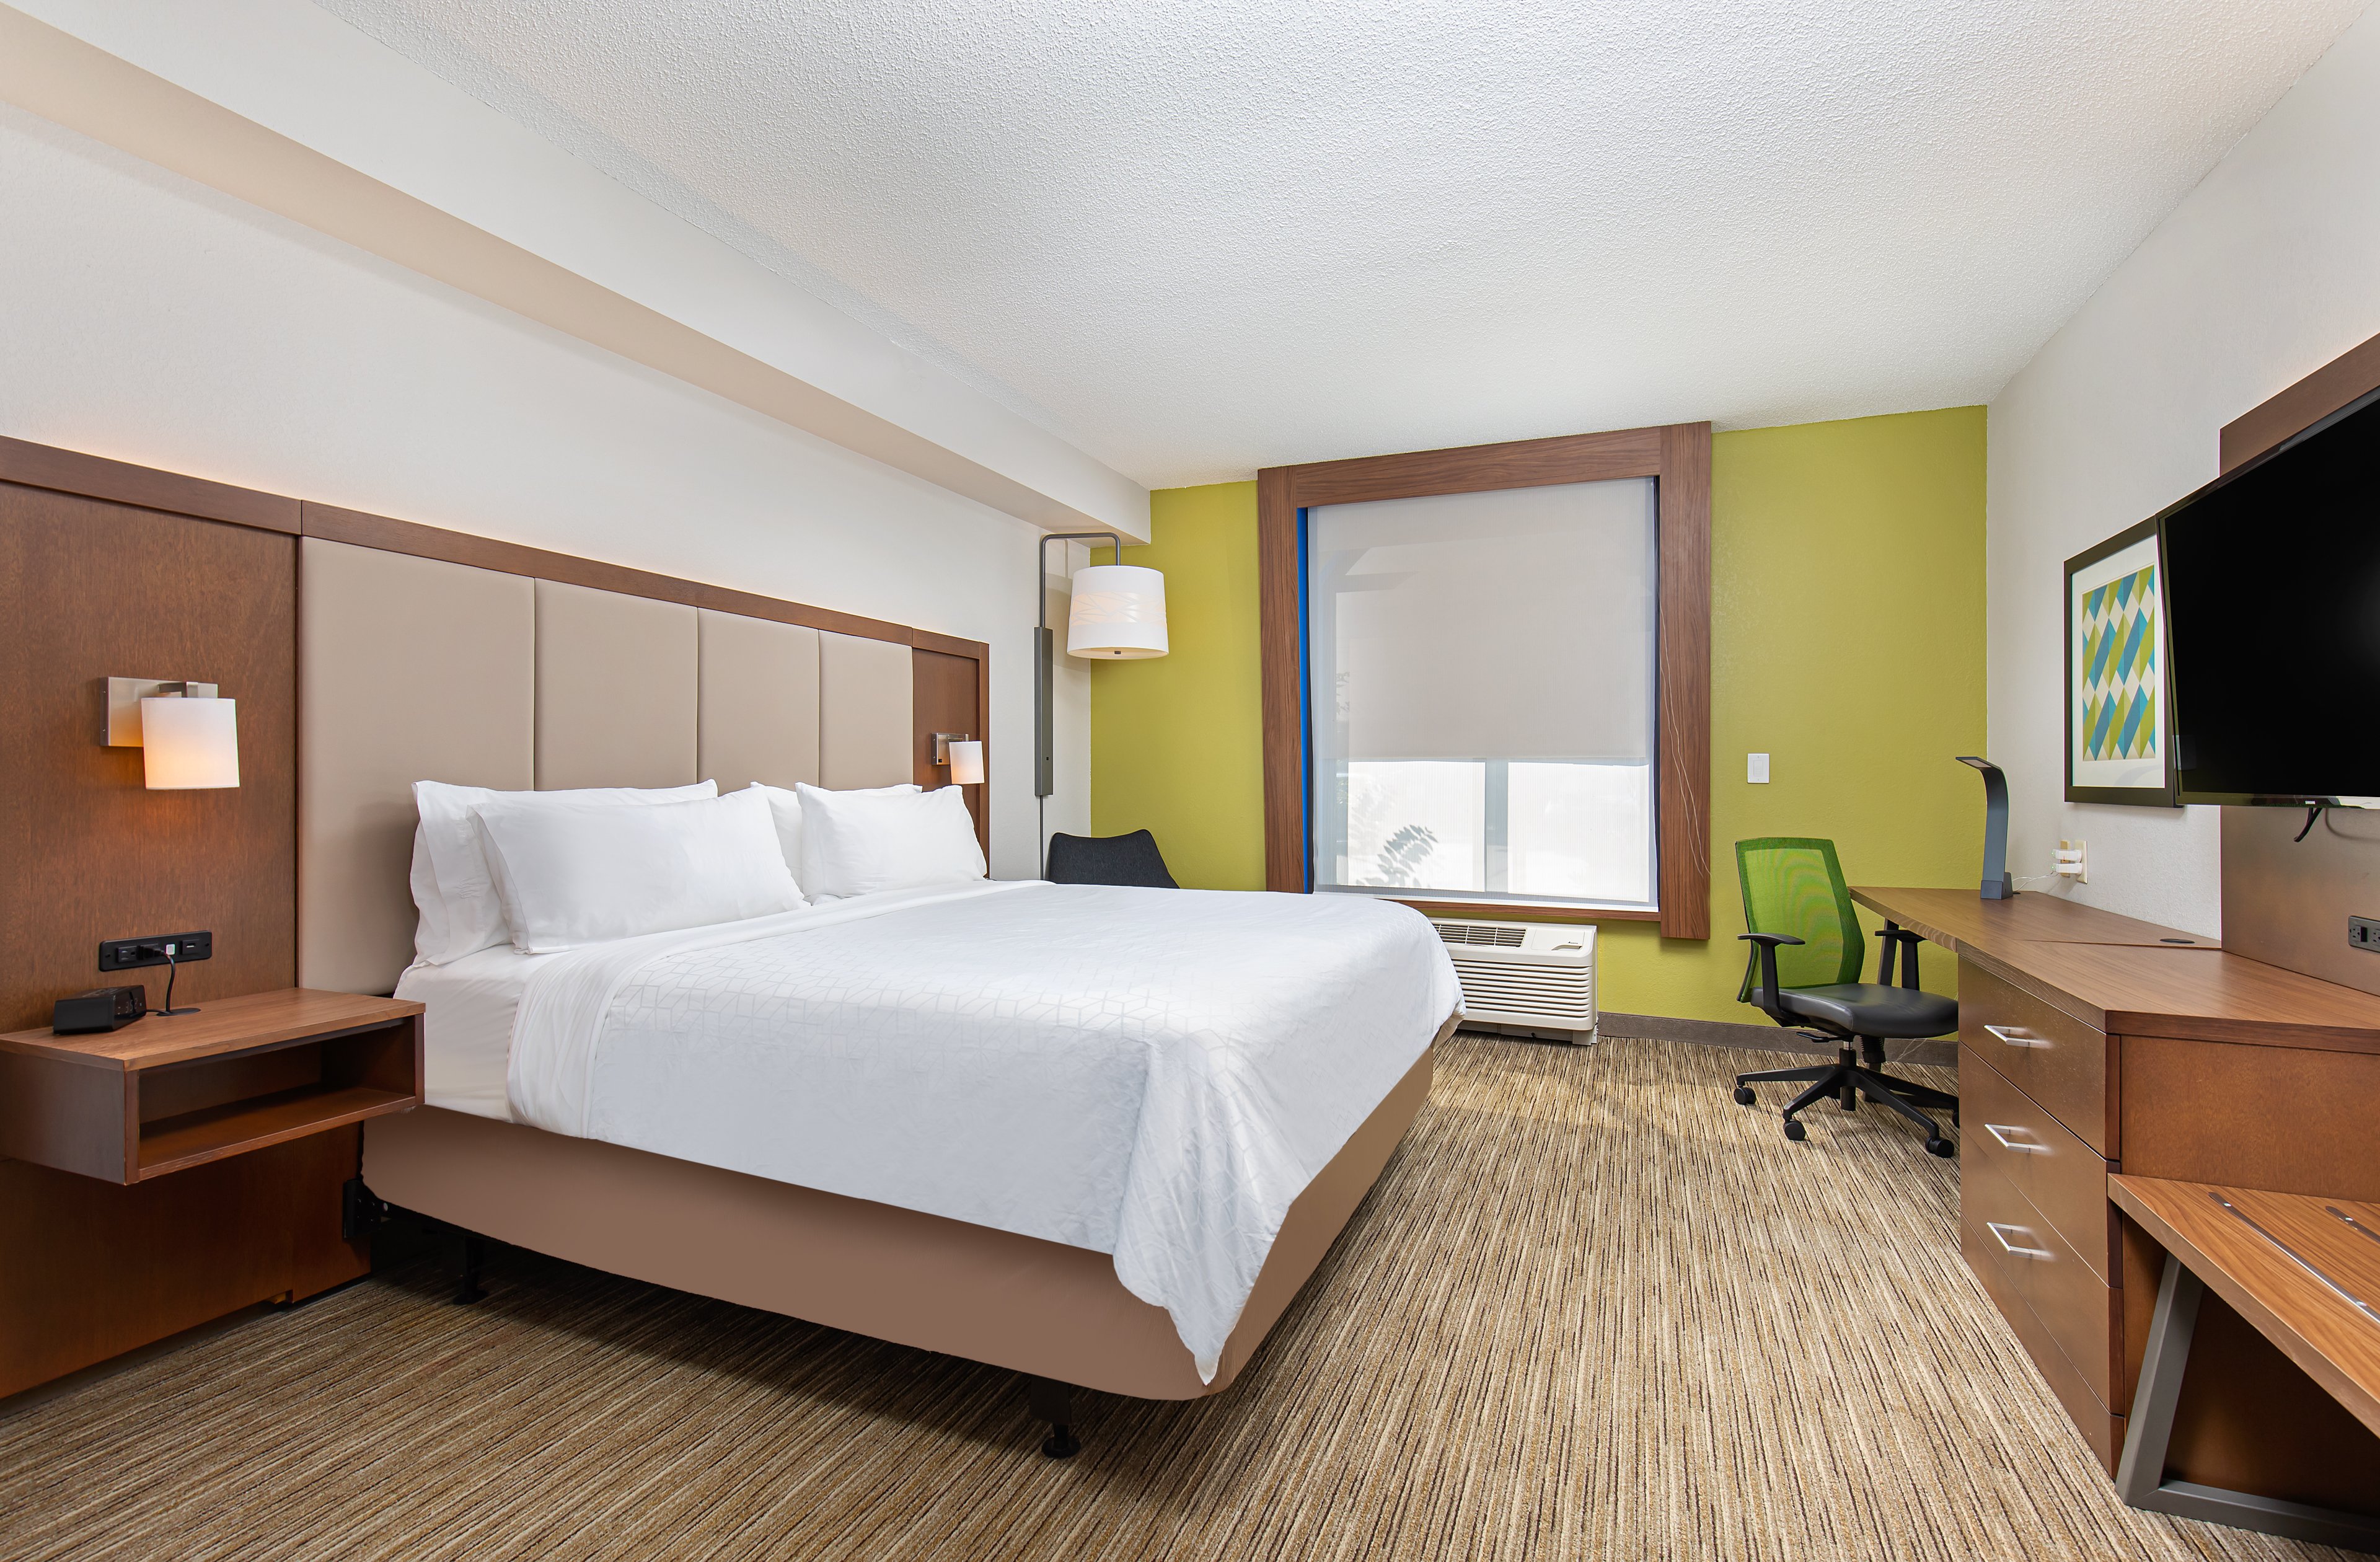 Indulge yourself in our welcoming guest rooms!